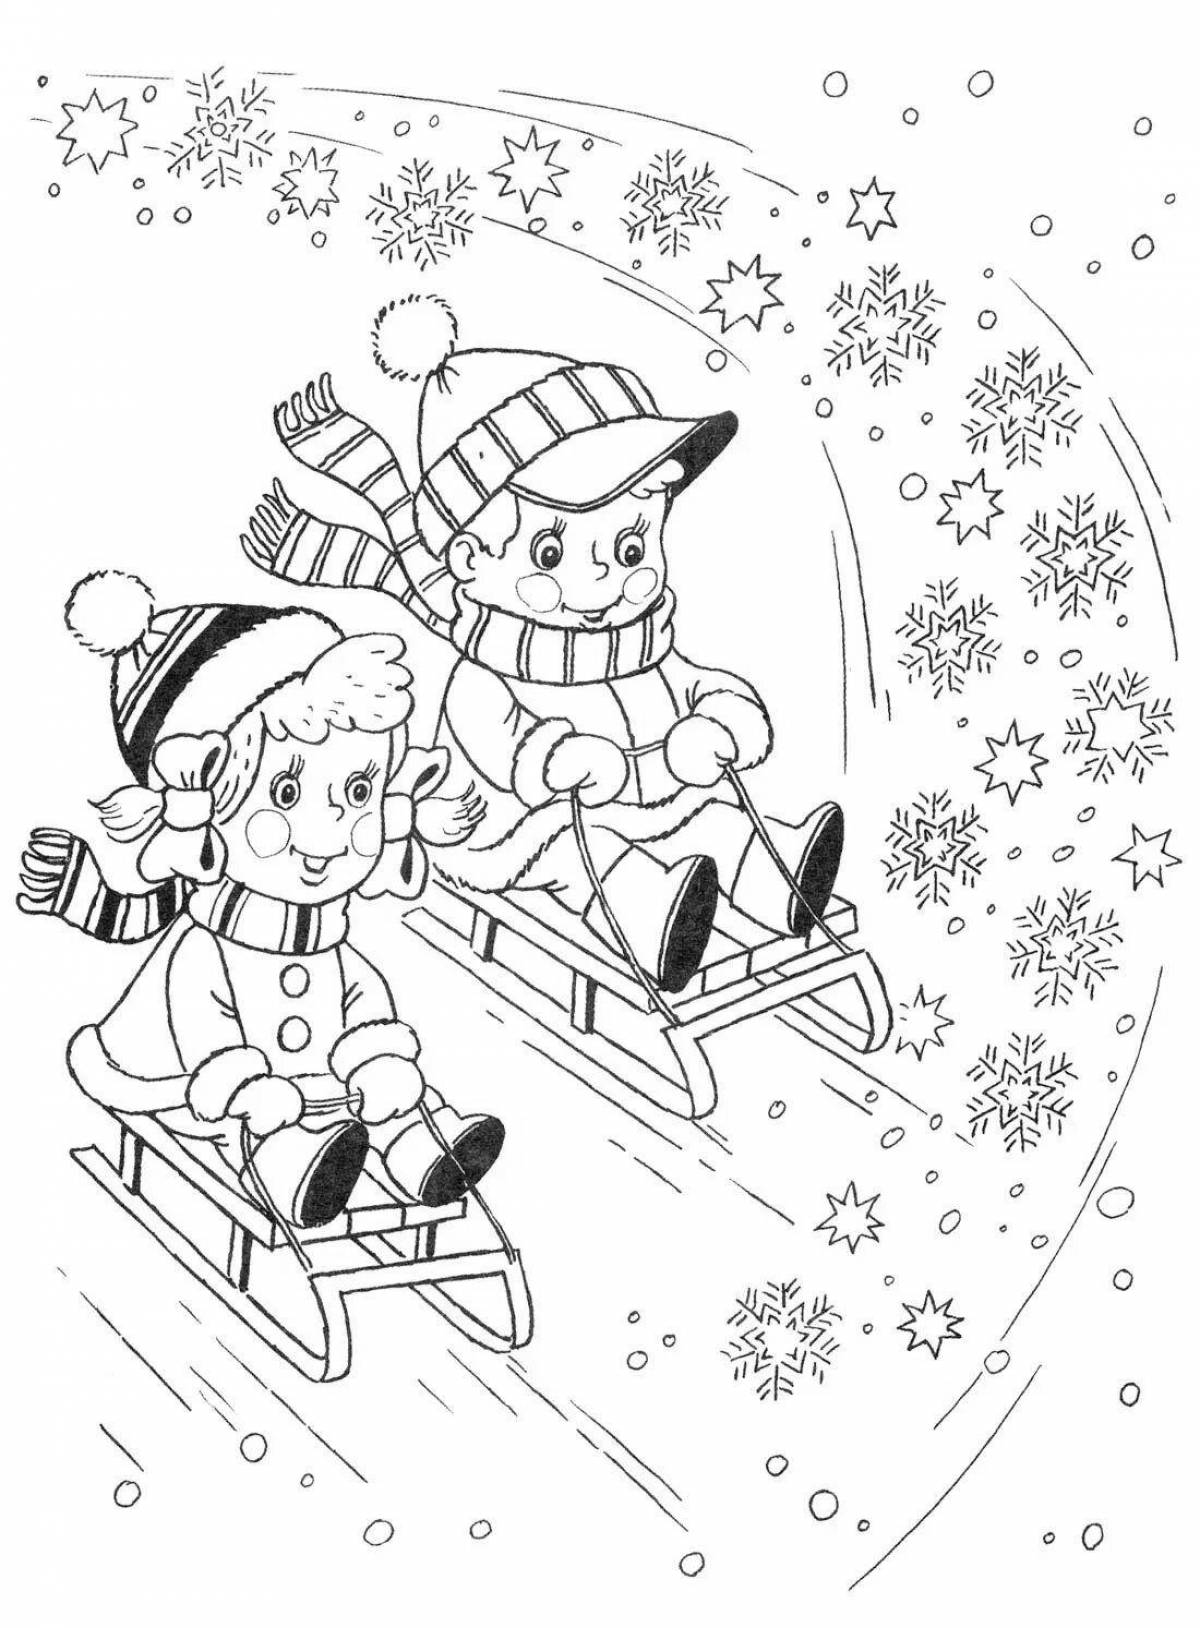 Joyful winter coloring for children 6-7 years old